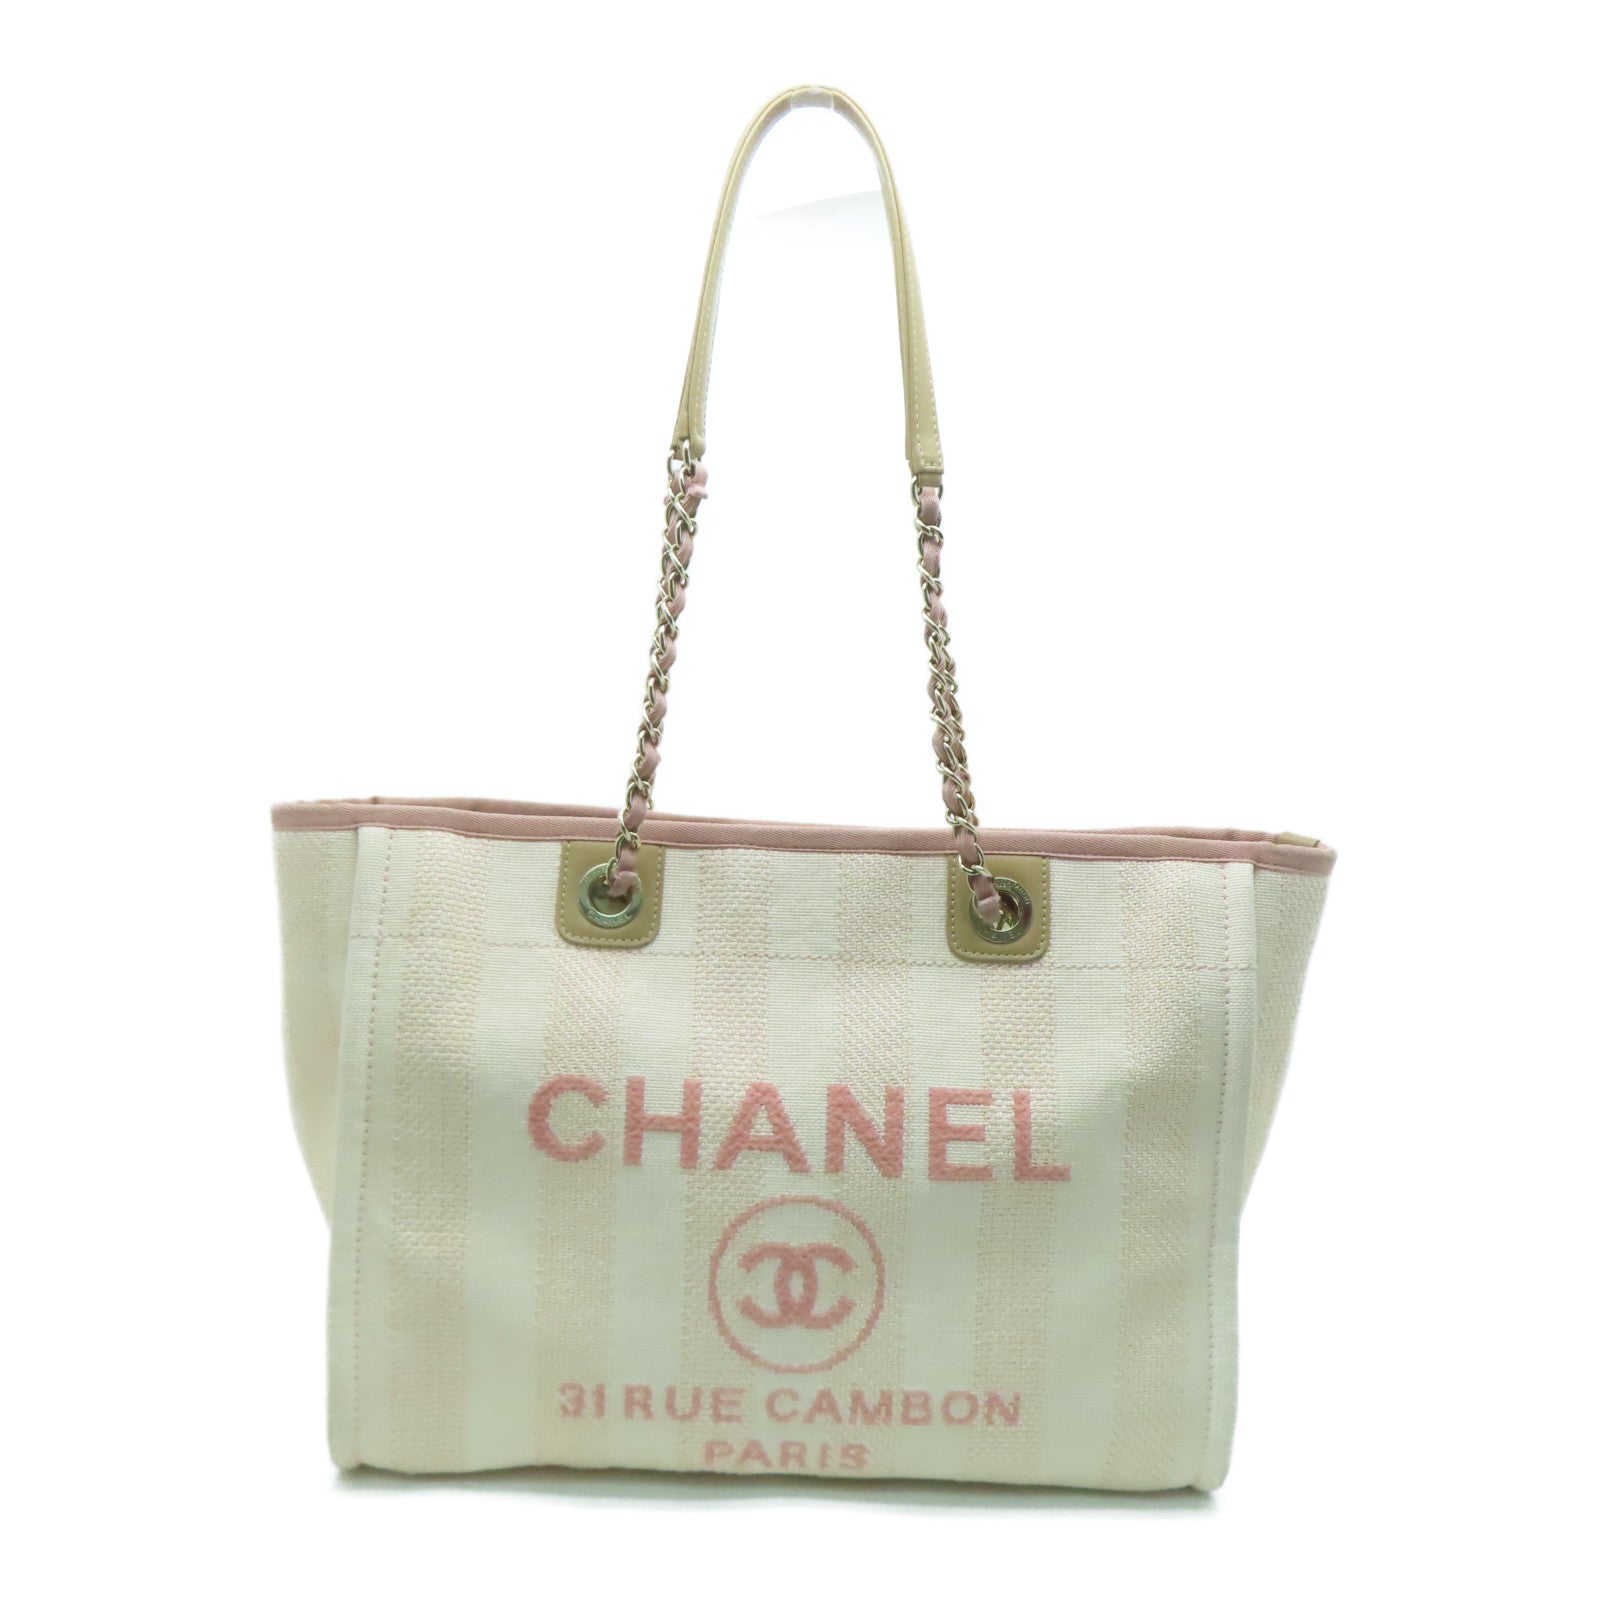 CHANEL 帆布Deauville Tote金扣手挽袋粉红色– Brand Off Hong Kong